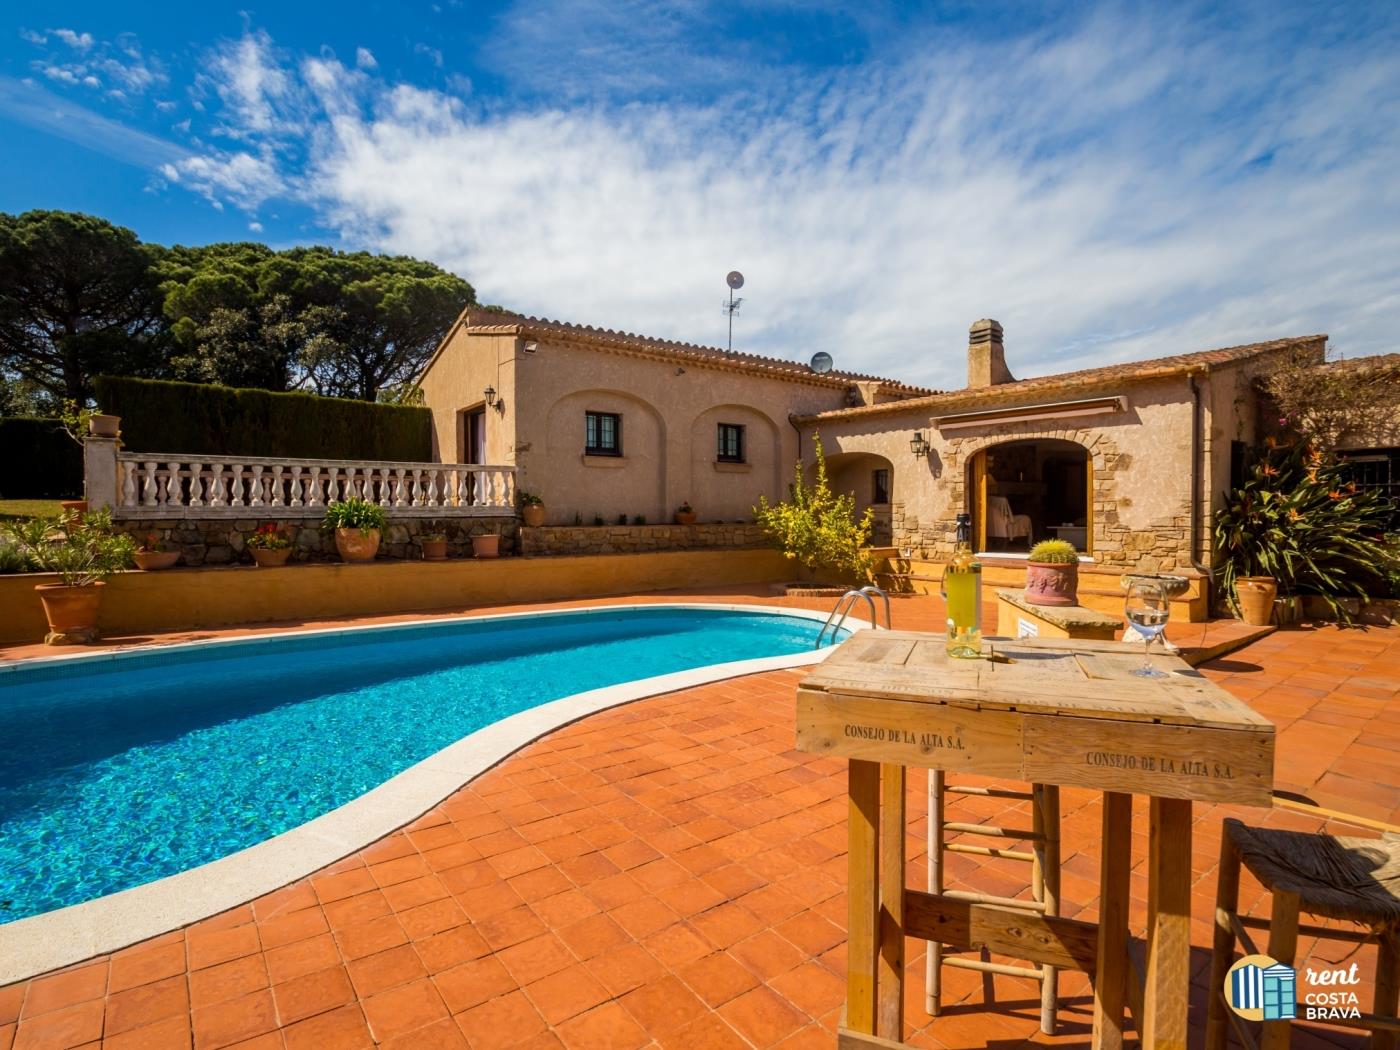 Villa Violeta spacious townhouse with private swimming pool. in Castell-Platja d'Aro